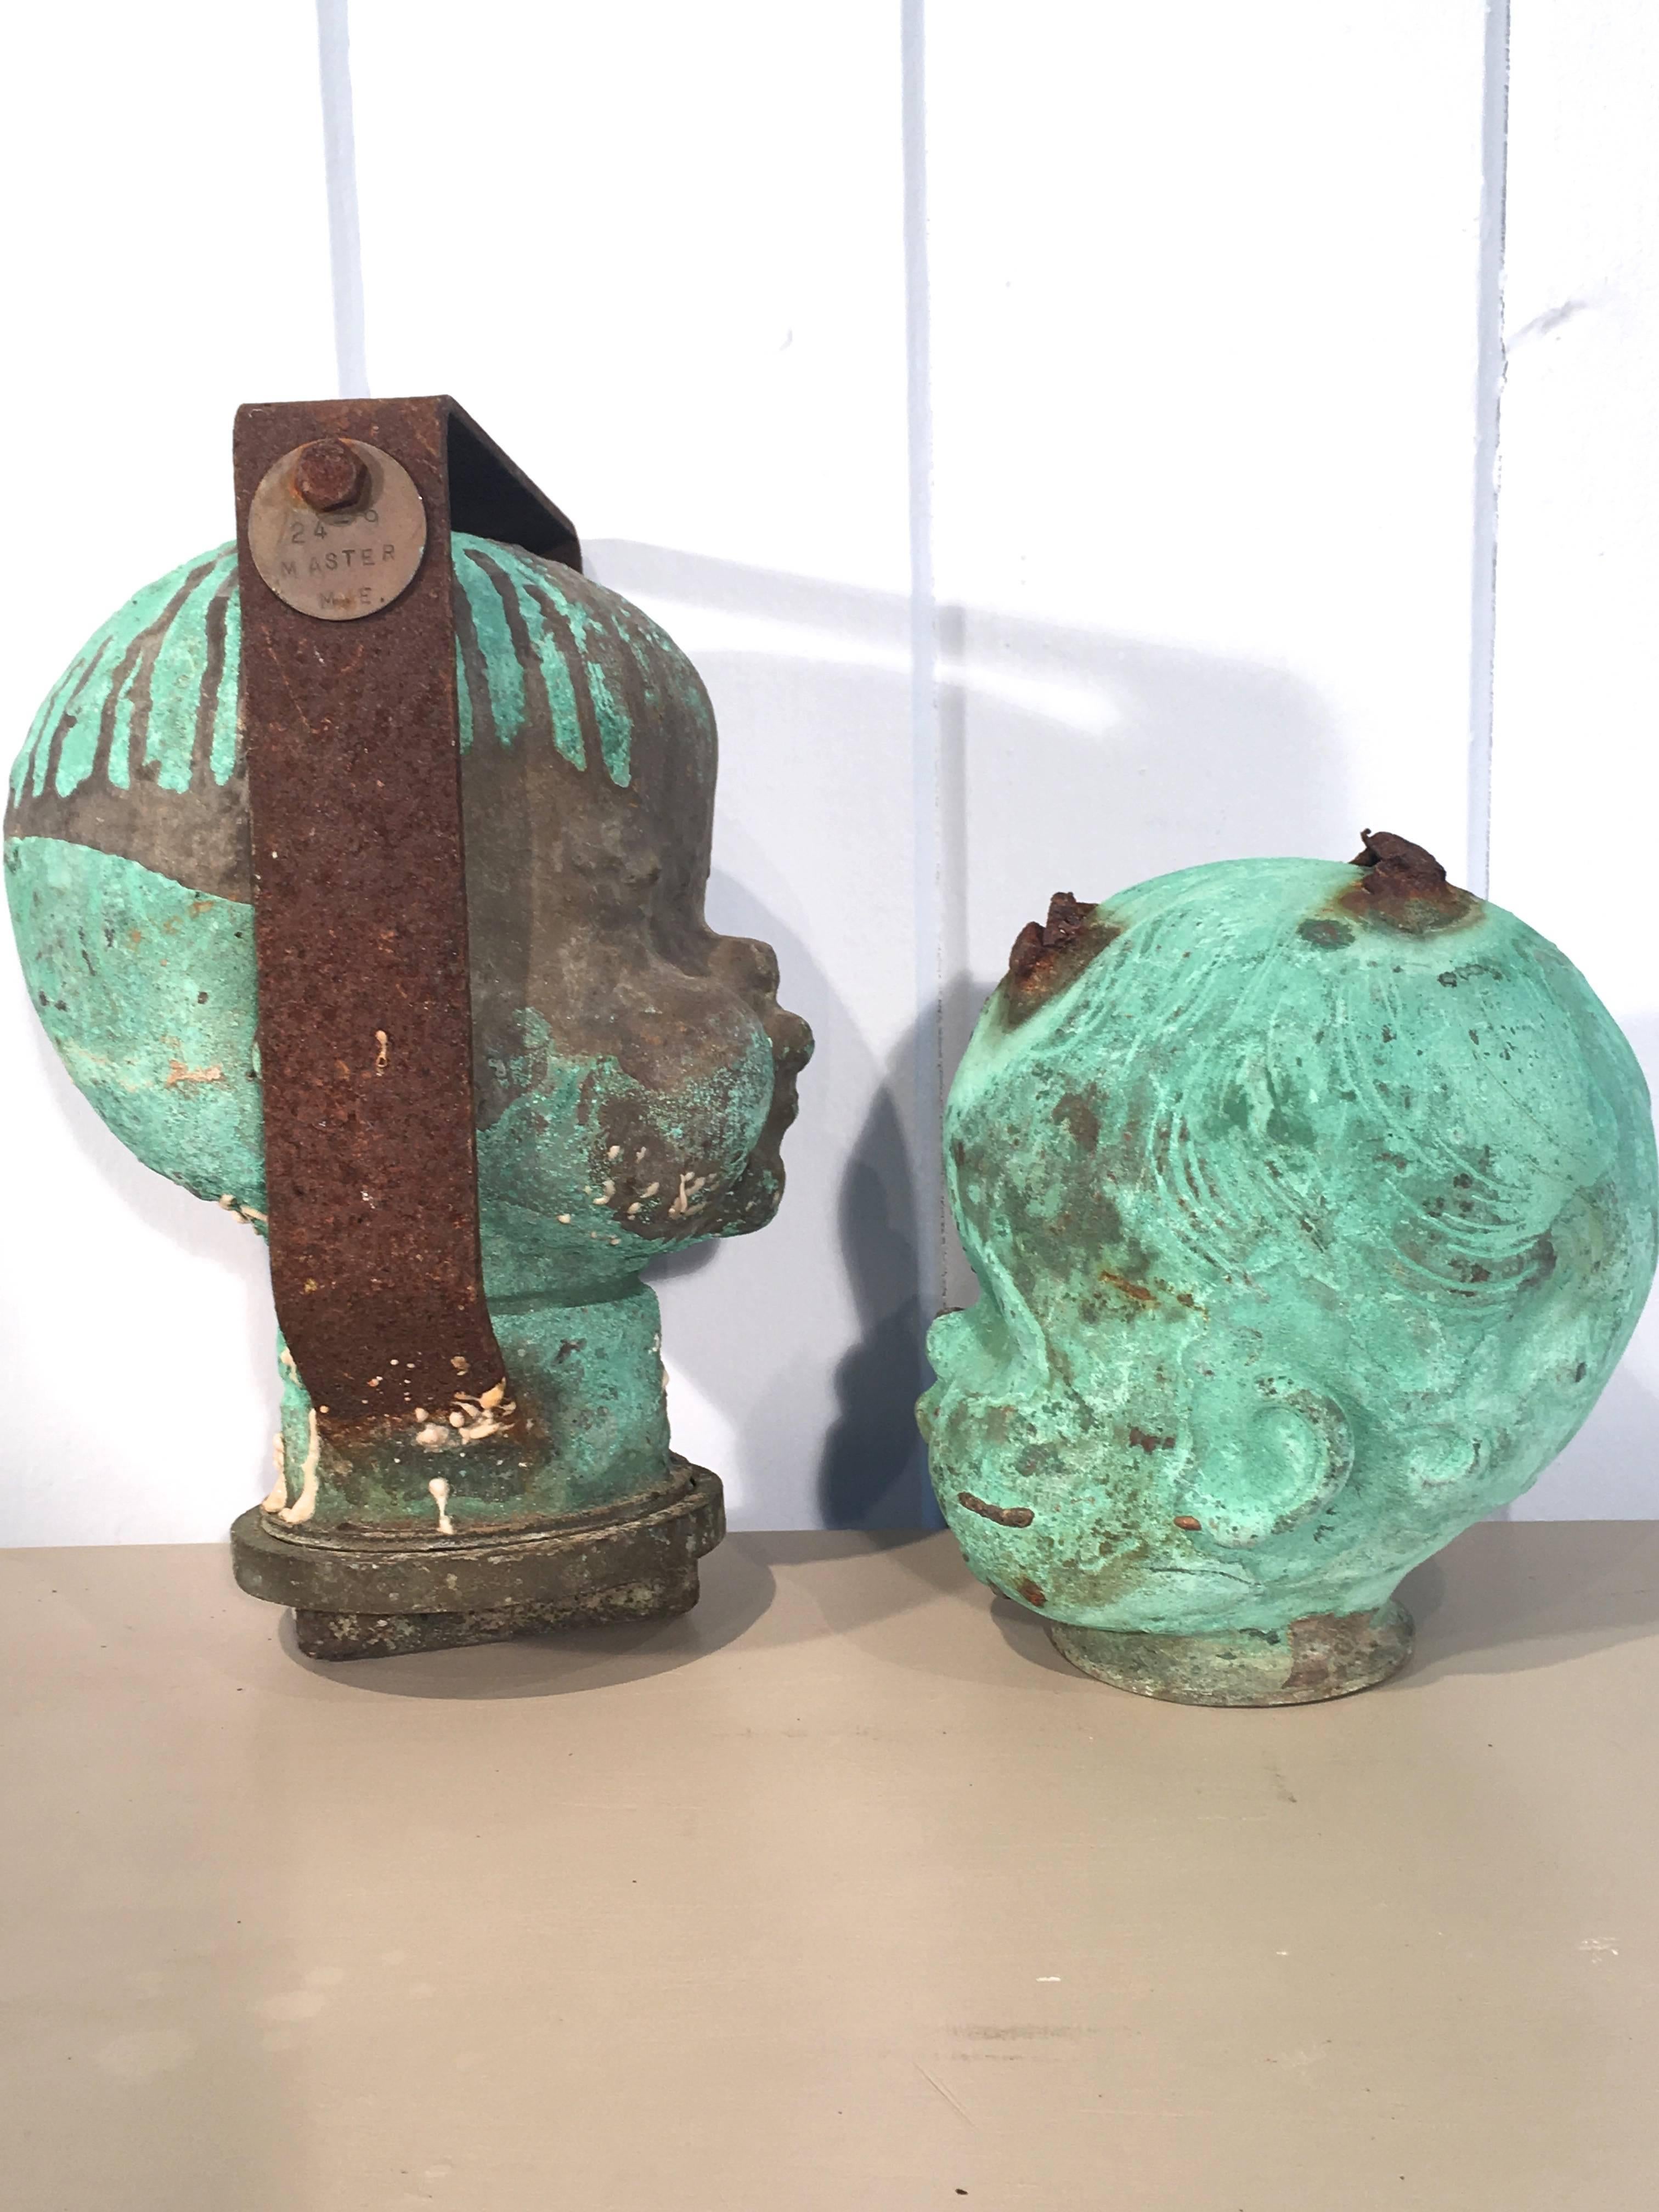 Certainly not our usual fare, but definitely a statement! We have two of these remaining from a collection of natural verdigris bronze doll head molds from a defunct factory in Falls River, MA. We have thought of lighting them from within and